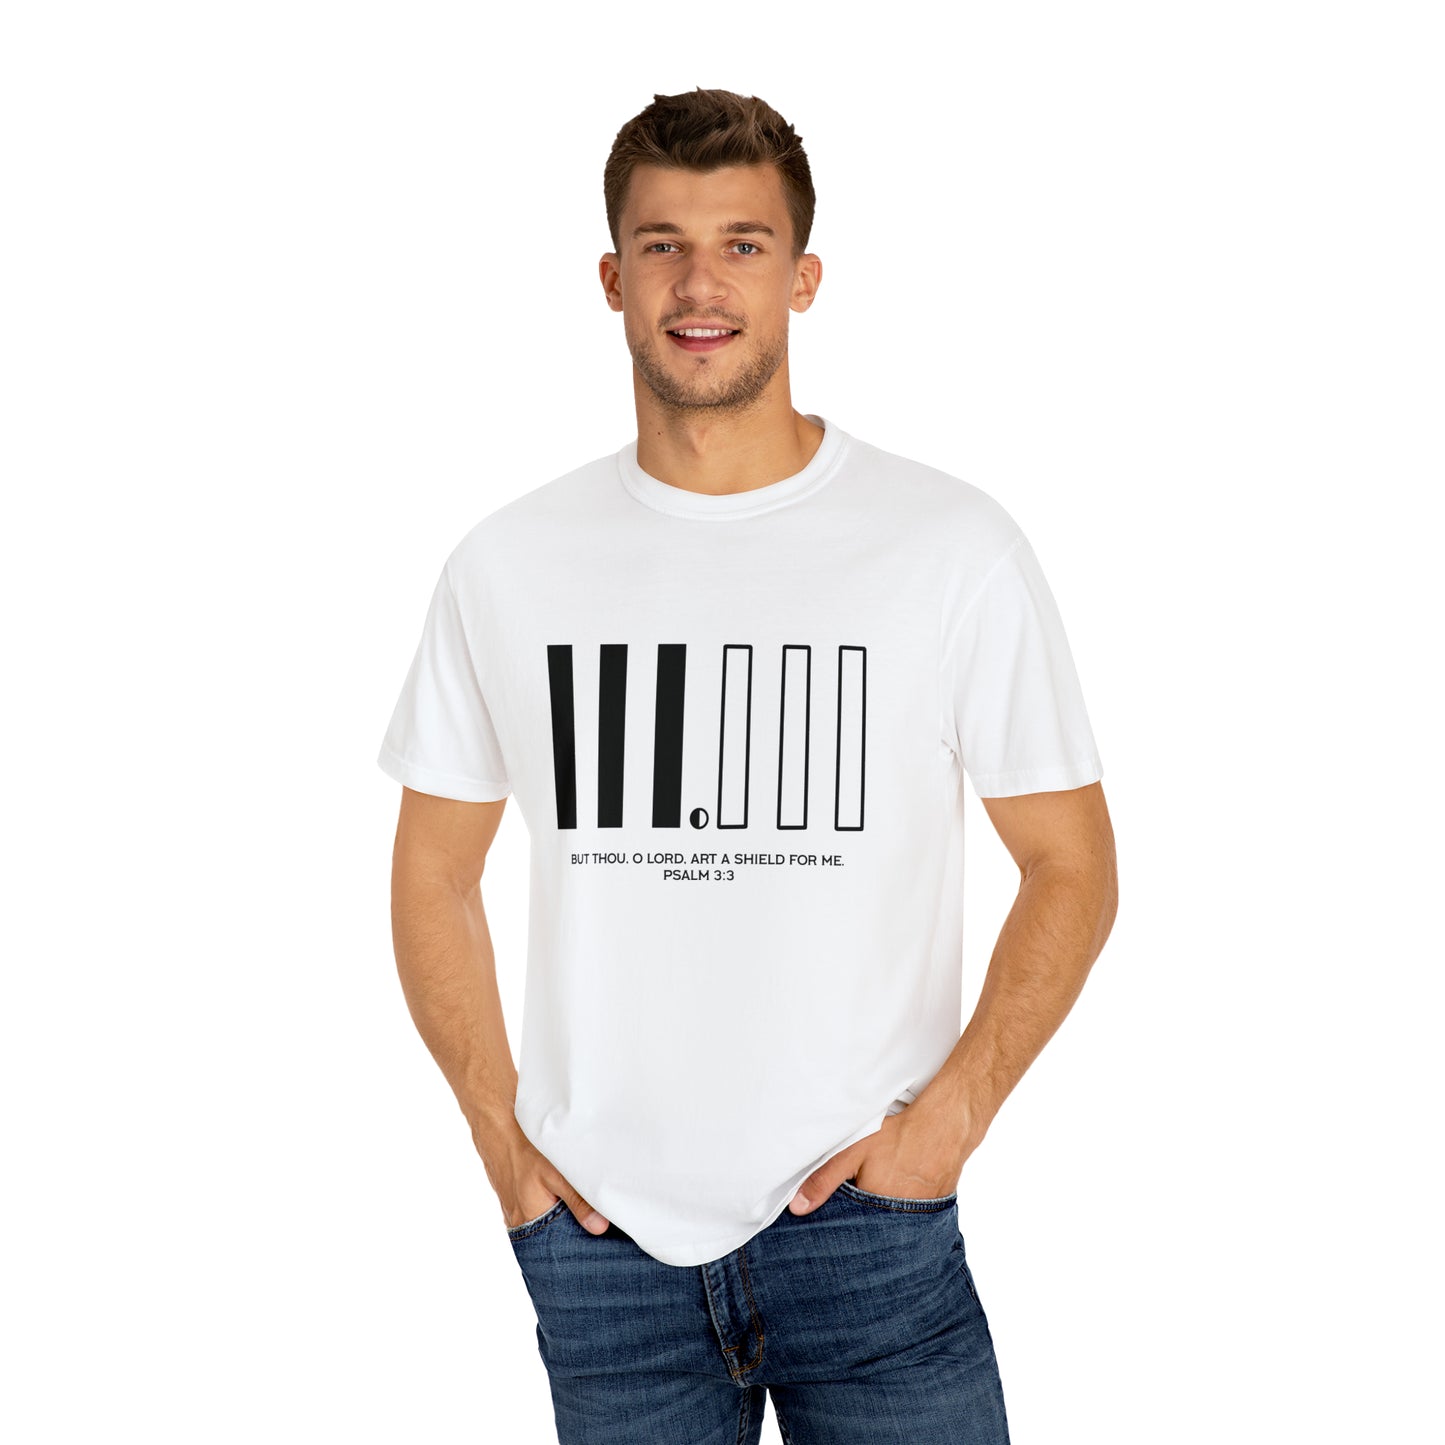 Psalm 3:3 T-shirt with quote